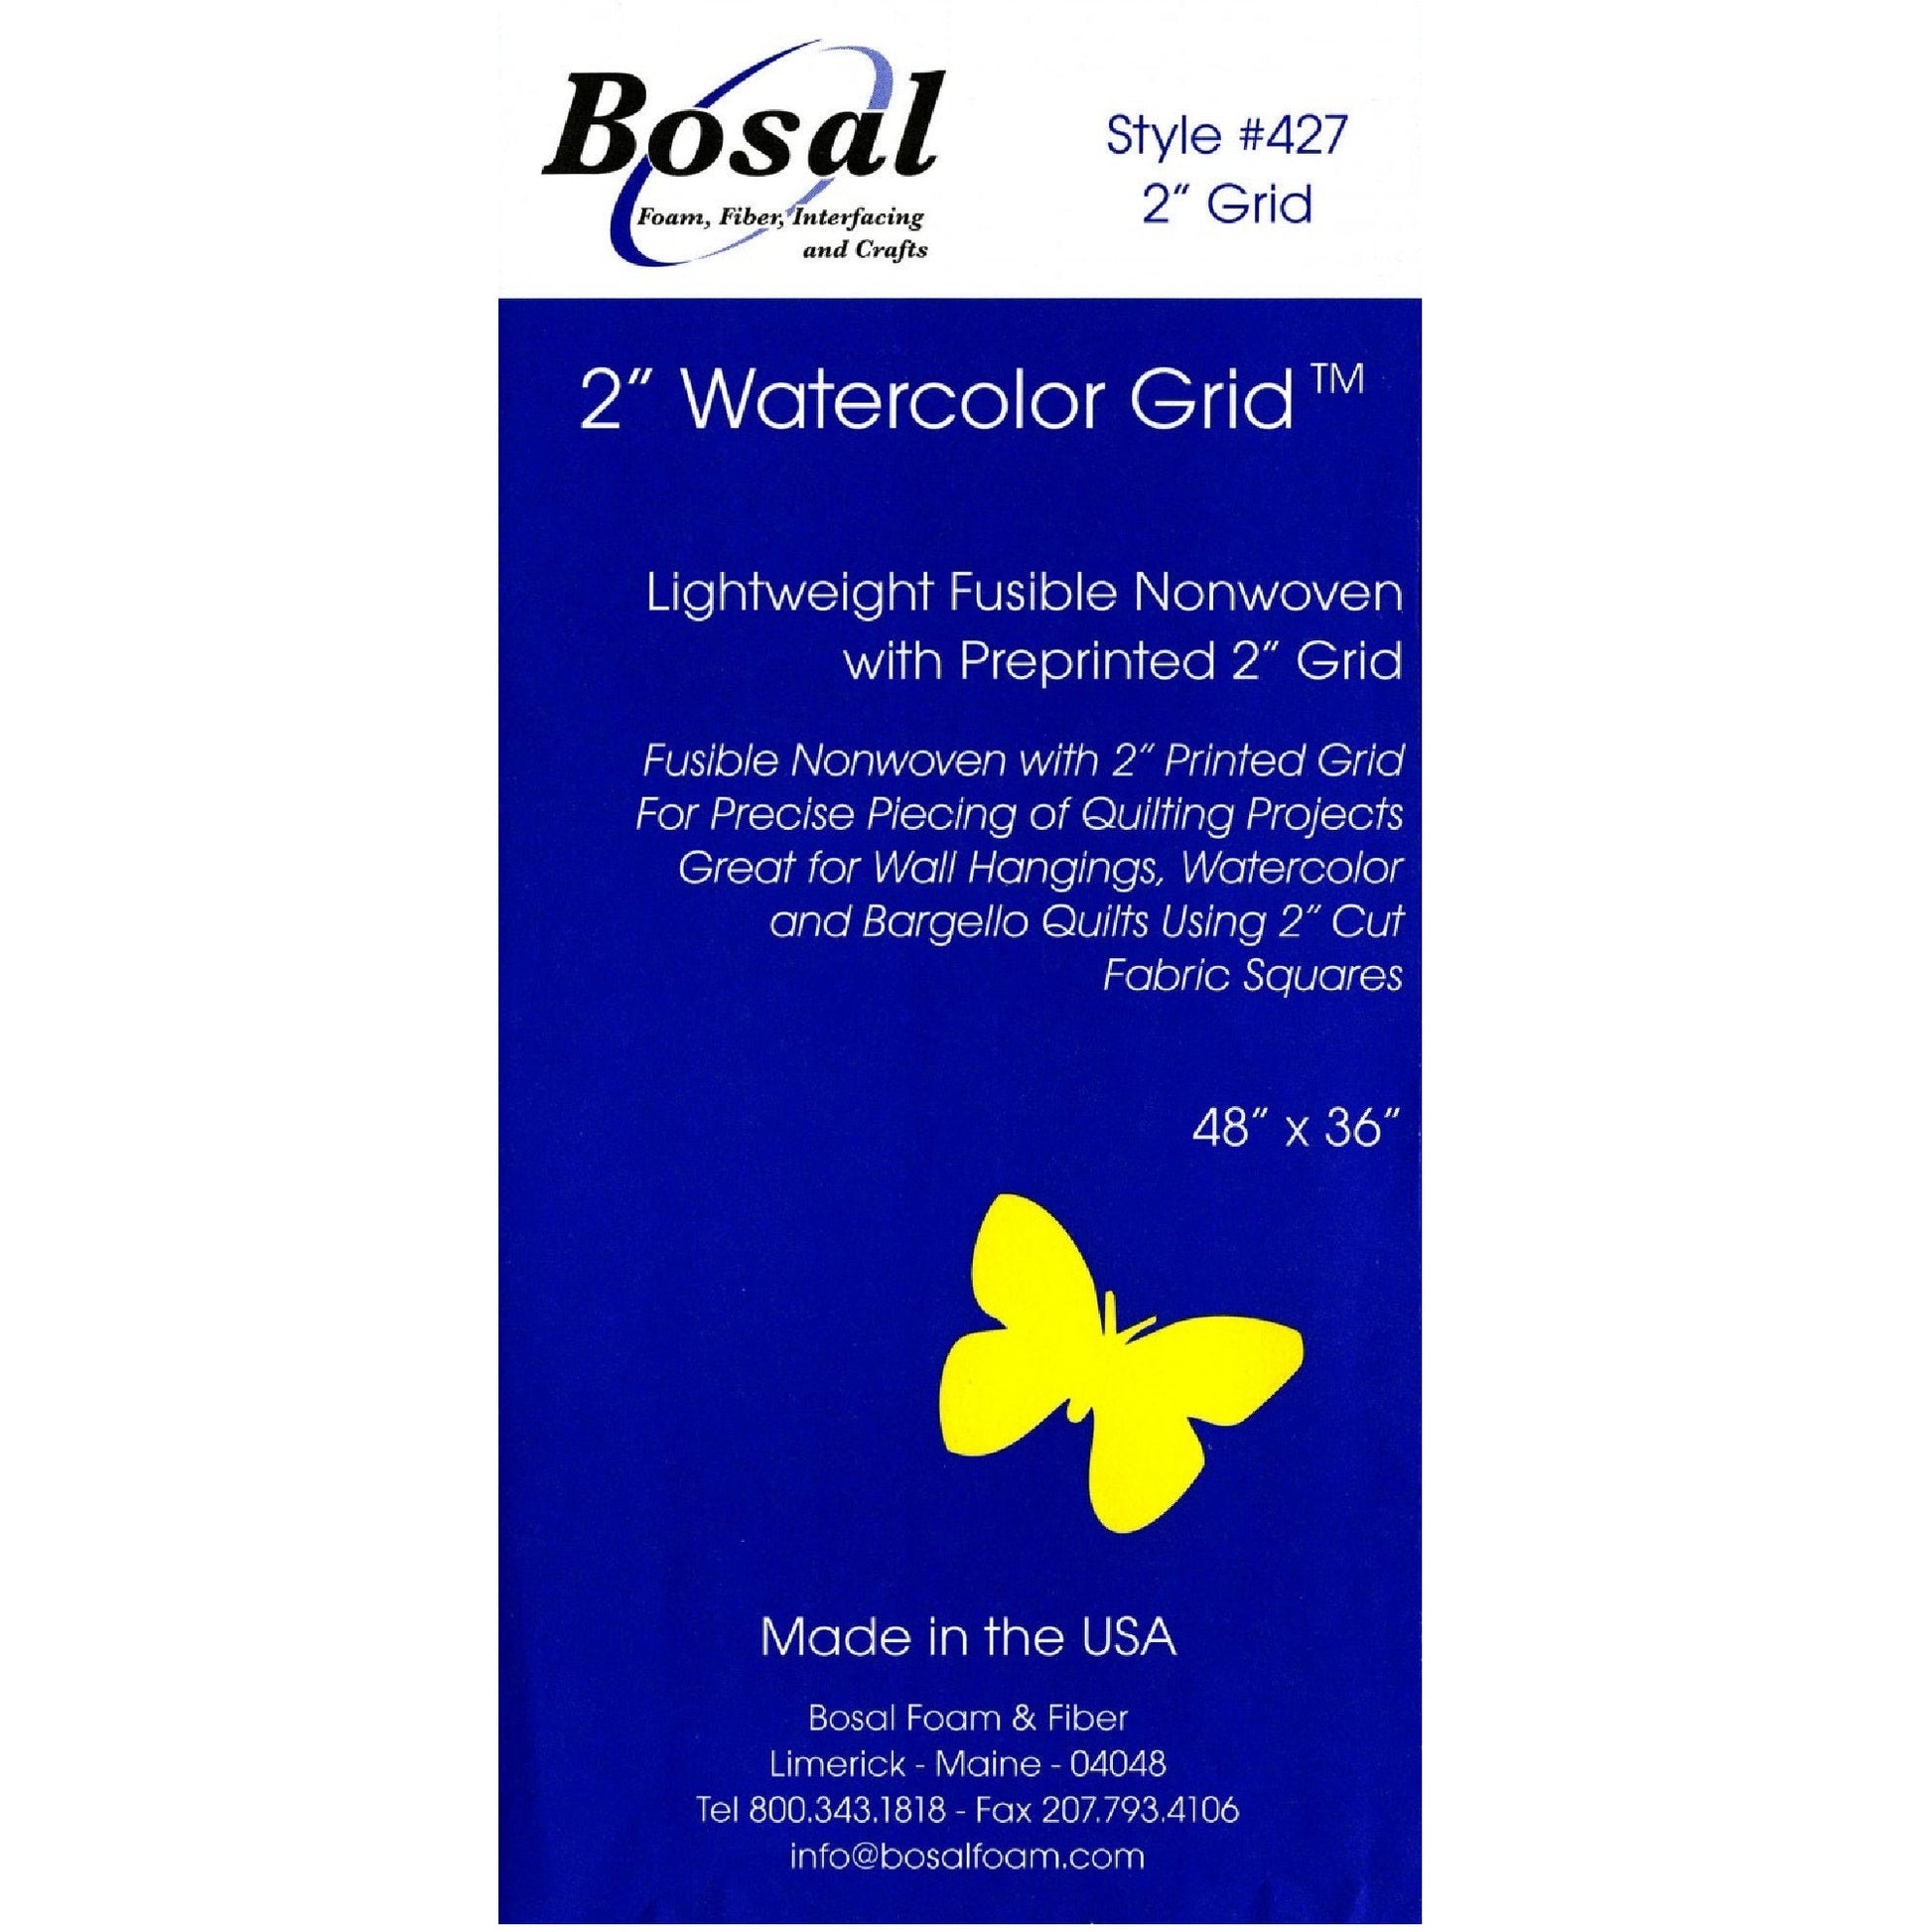 Bosal Quilter’s Grid 2” Lightweight Fusible Nonwoven Interfacing with Preprinted 2” grid - 36” x 48” - Watercolor or Bargello Quilting